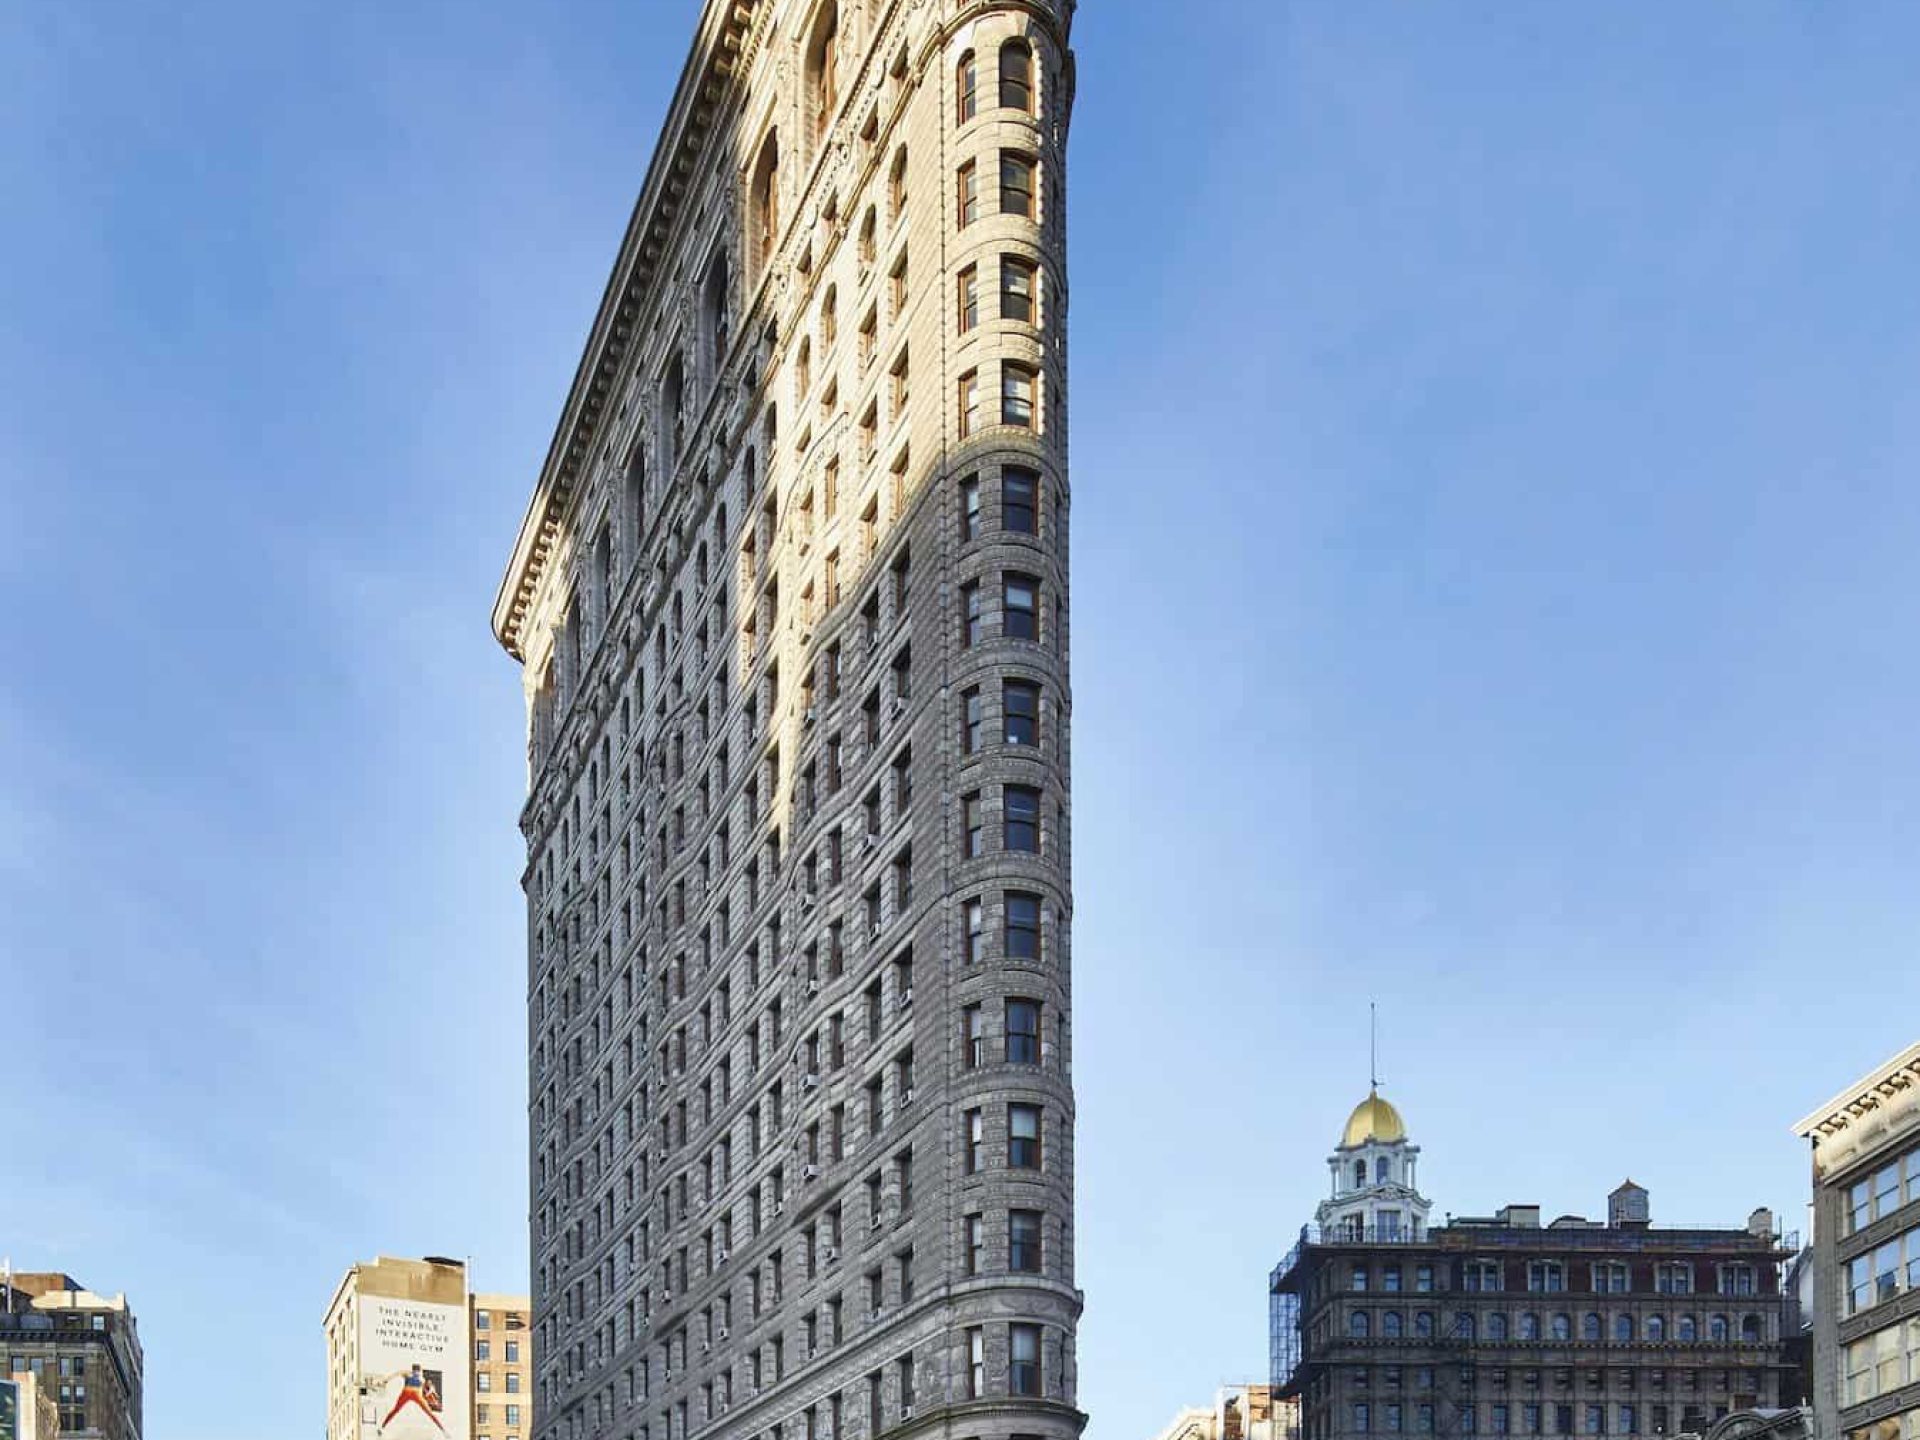 Street view of the Flatiron Building in New York. Tall skinny stone building with a green awning around the first floor.